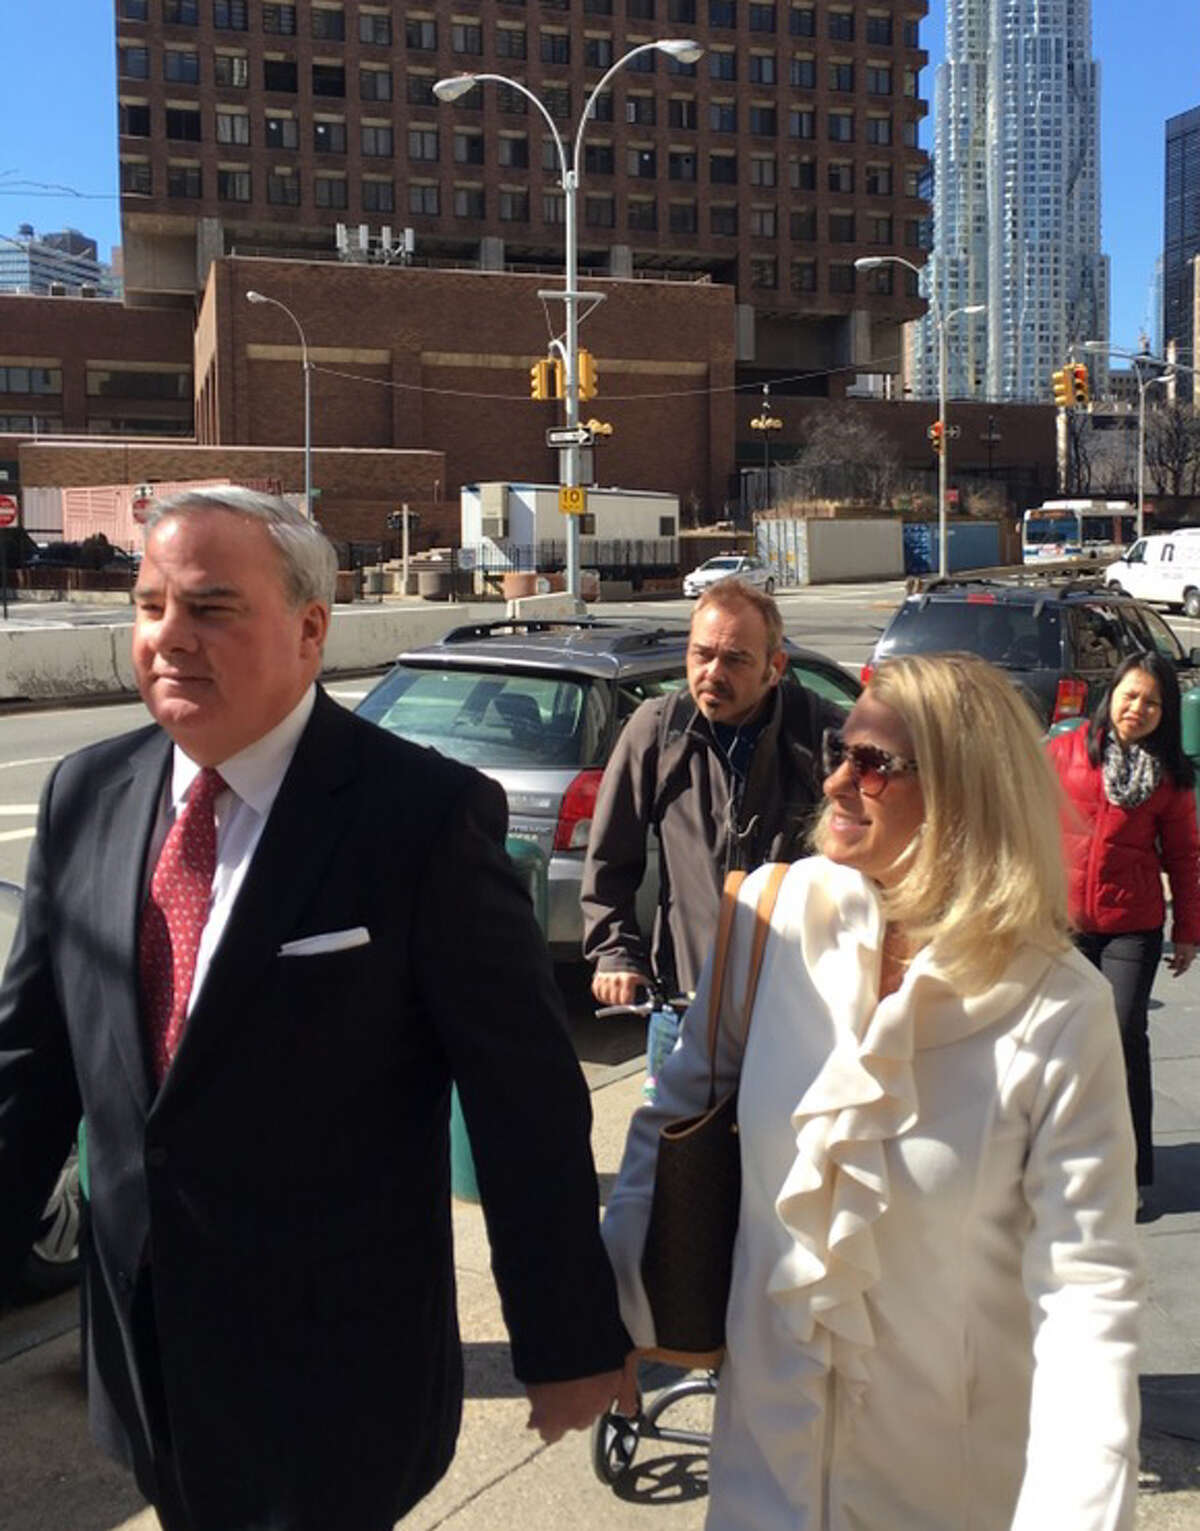 Former Connecticut Gov. John Rowland with his wife Patricia last March outside a federal appeals court in New York. Rowland lost that appeal and dropped a follow-up appeal to the United States Supreme. He reported Monday to a federal prison in New York state, retaining his earlier ID number: 15623-014.